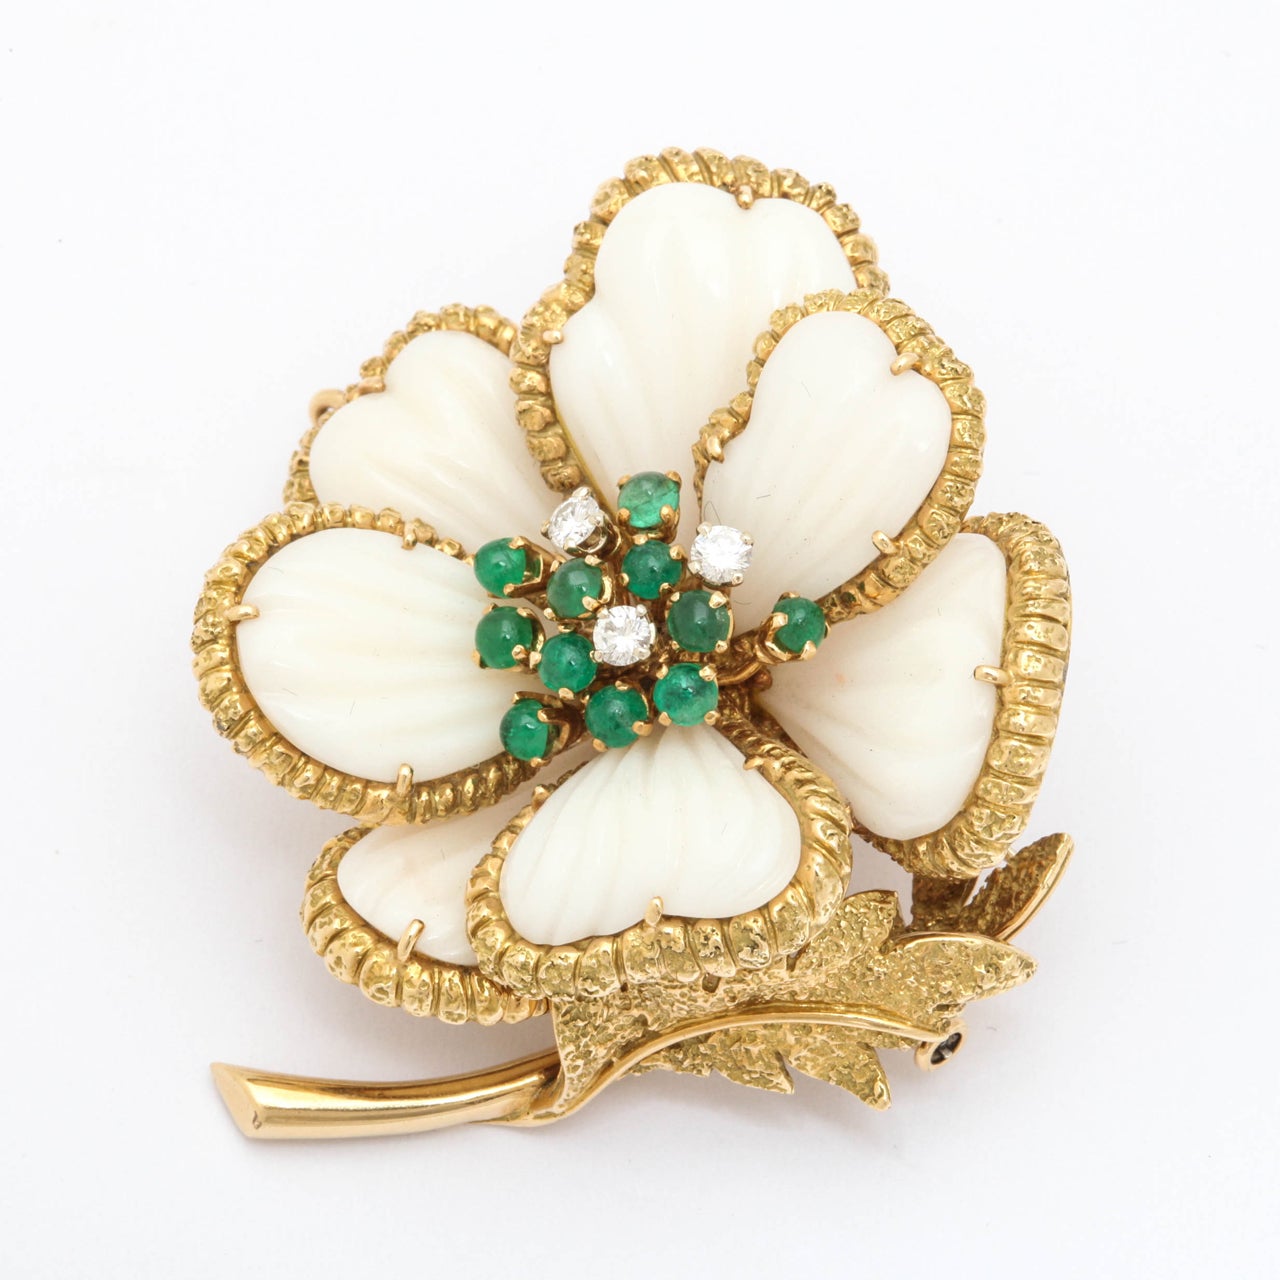 A beautiful carved white coral with Emerald and diamond brooch. This magnificent piece is in 18k yellow gold.